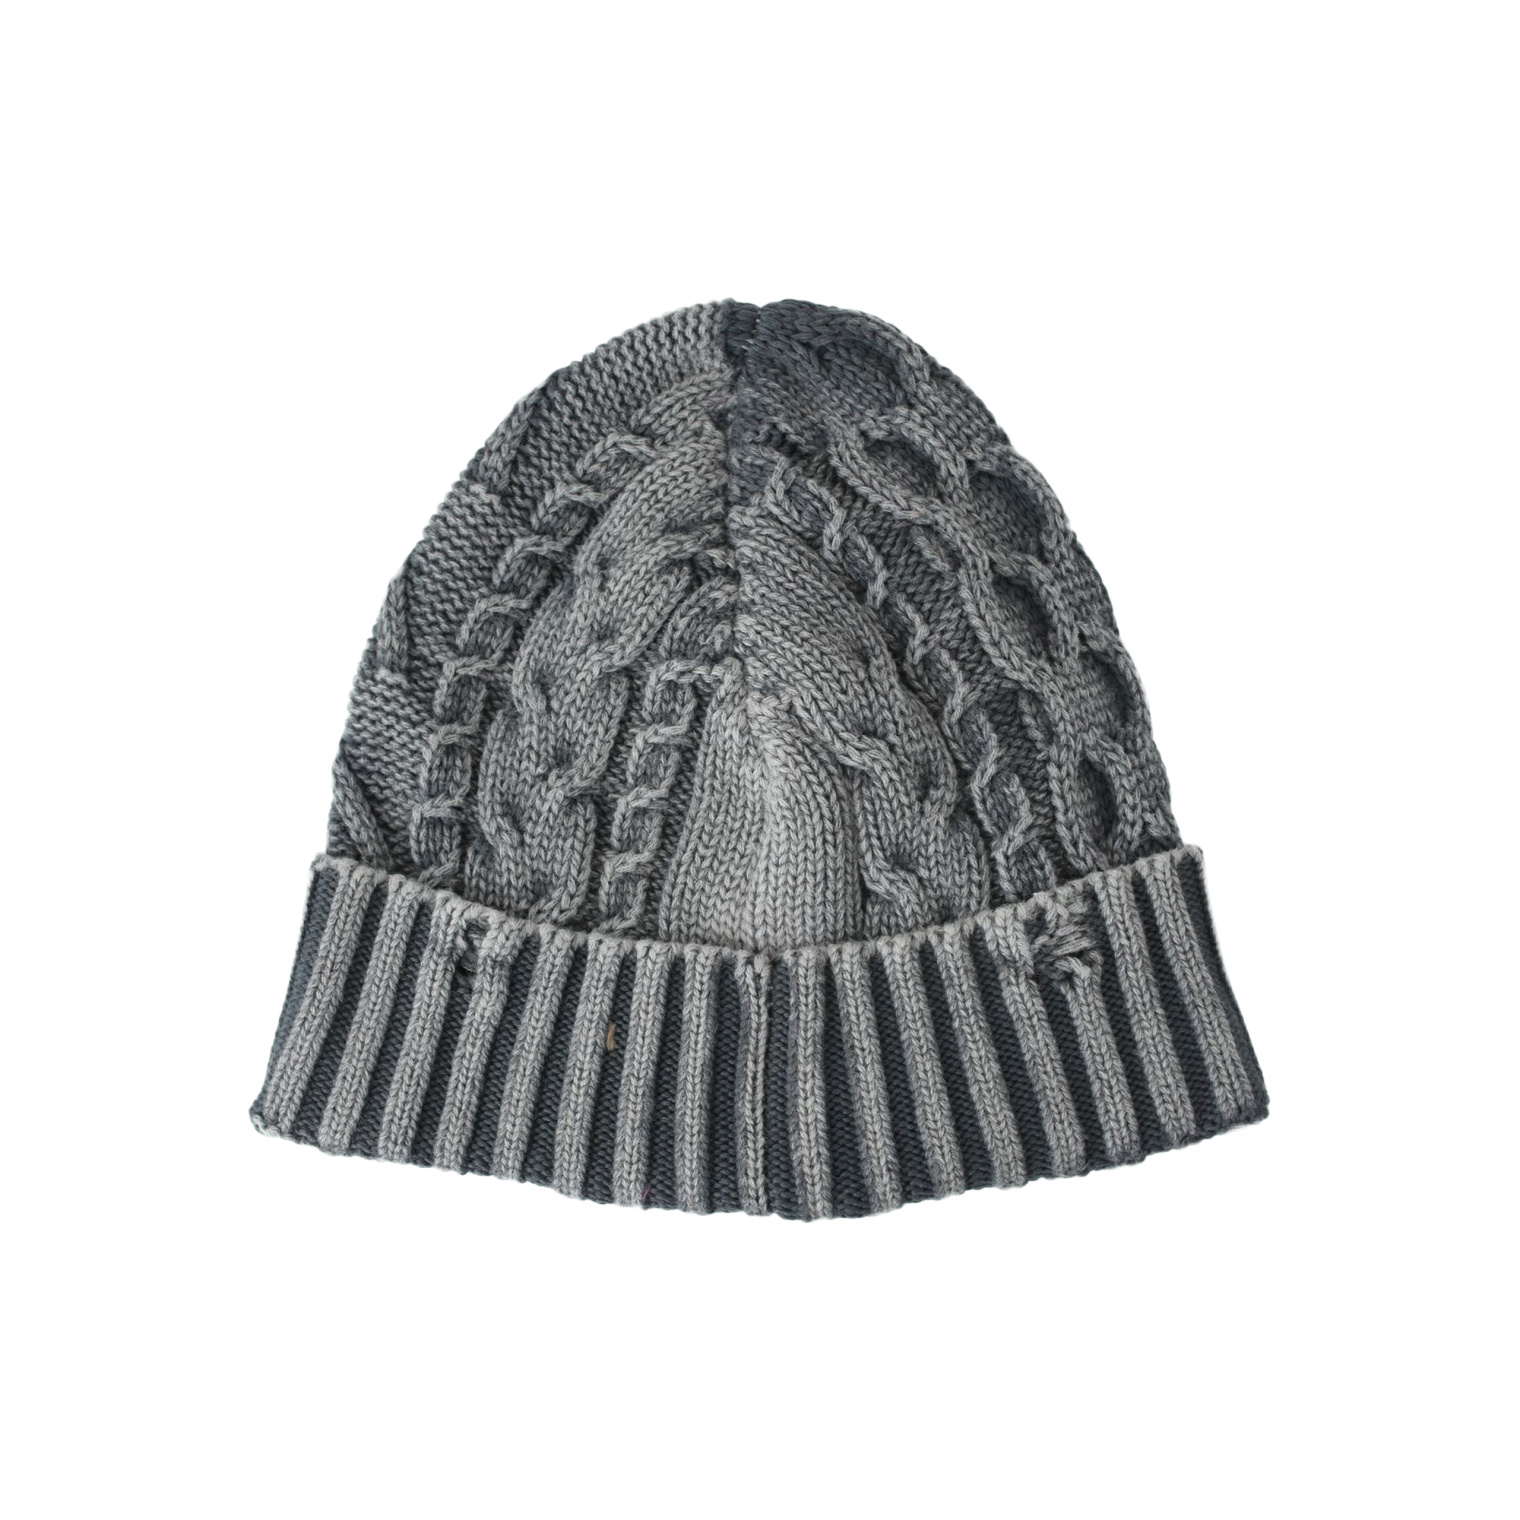 Diesel Faded beanie with logo